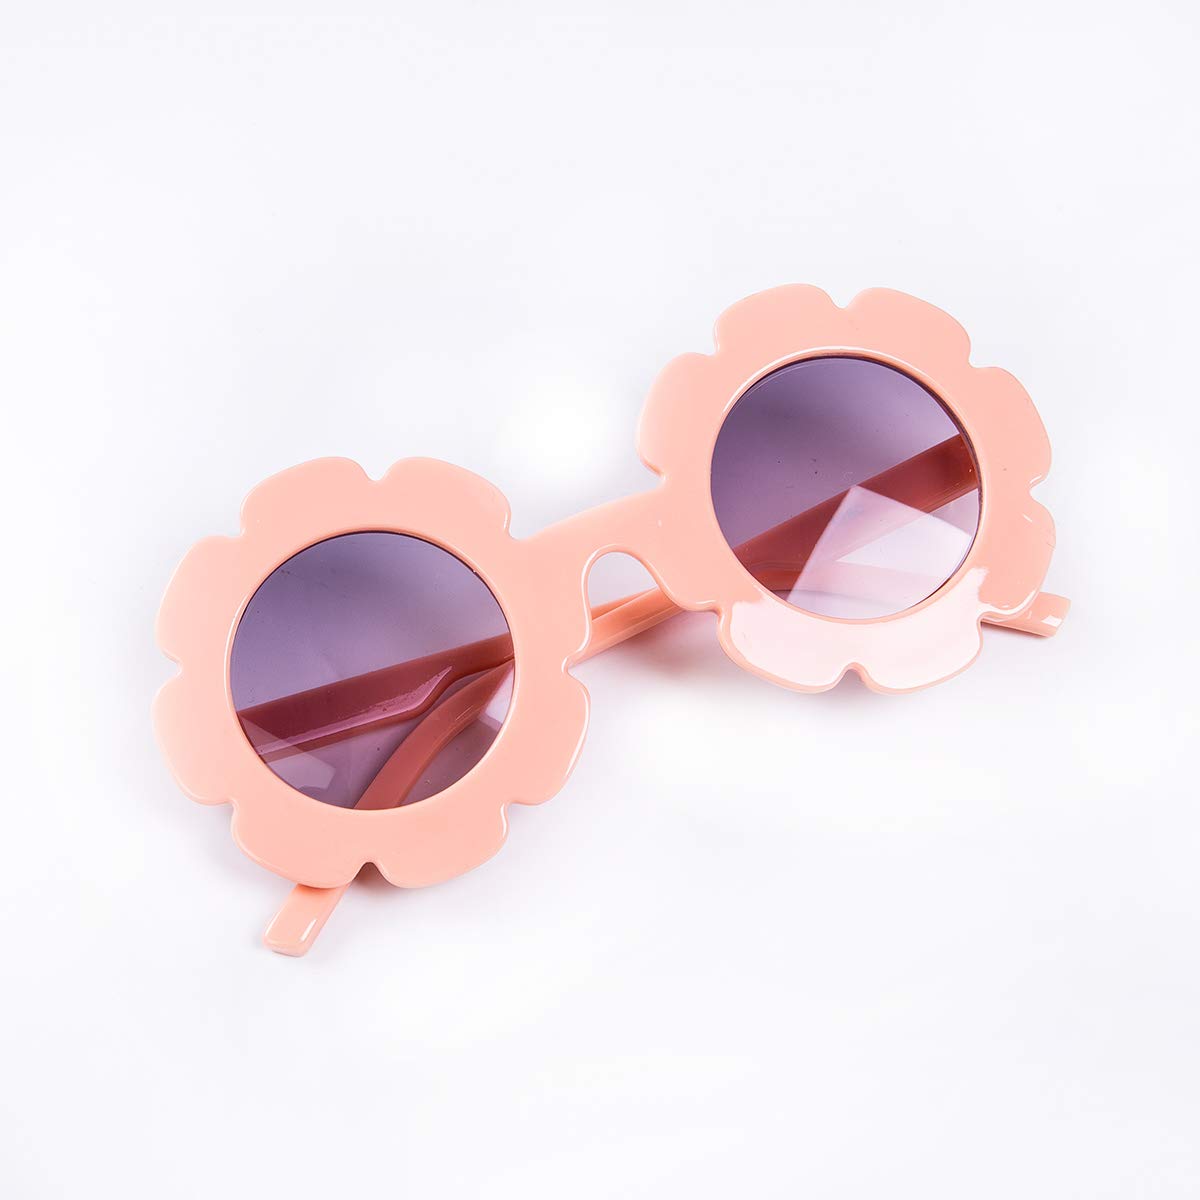 Cute Kids Toddler Baby Round Flower Sunglasses UV Protection Colorful Sunnies Glasses for Boys Girls 0-8T - Orange - image 1 of 7